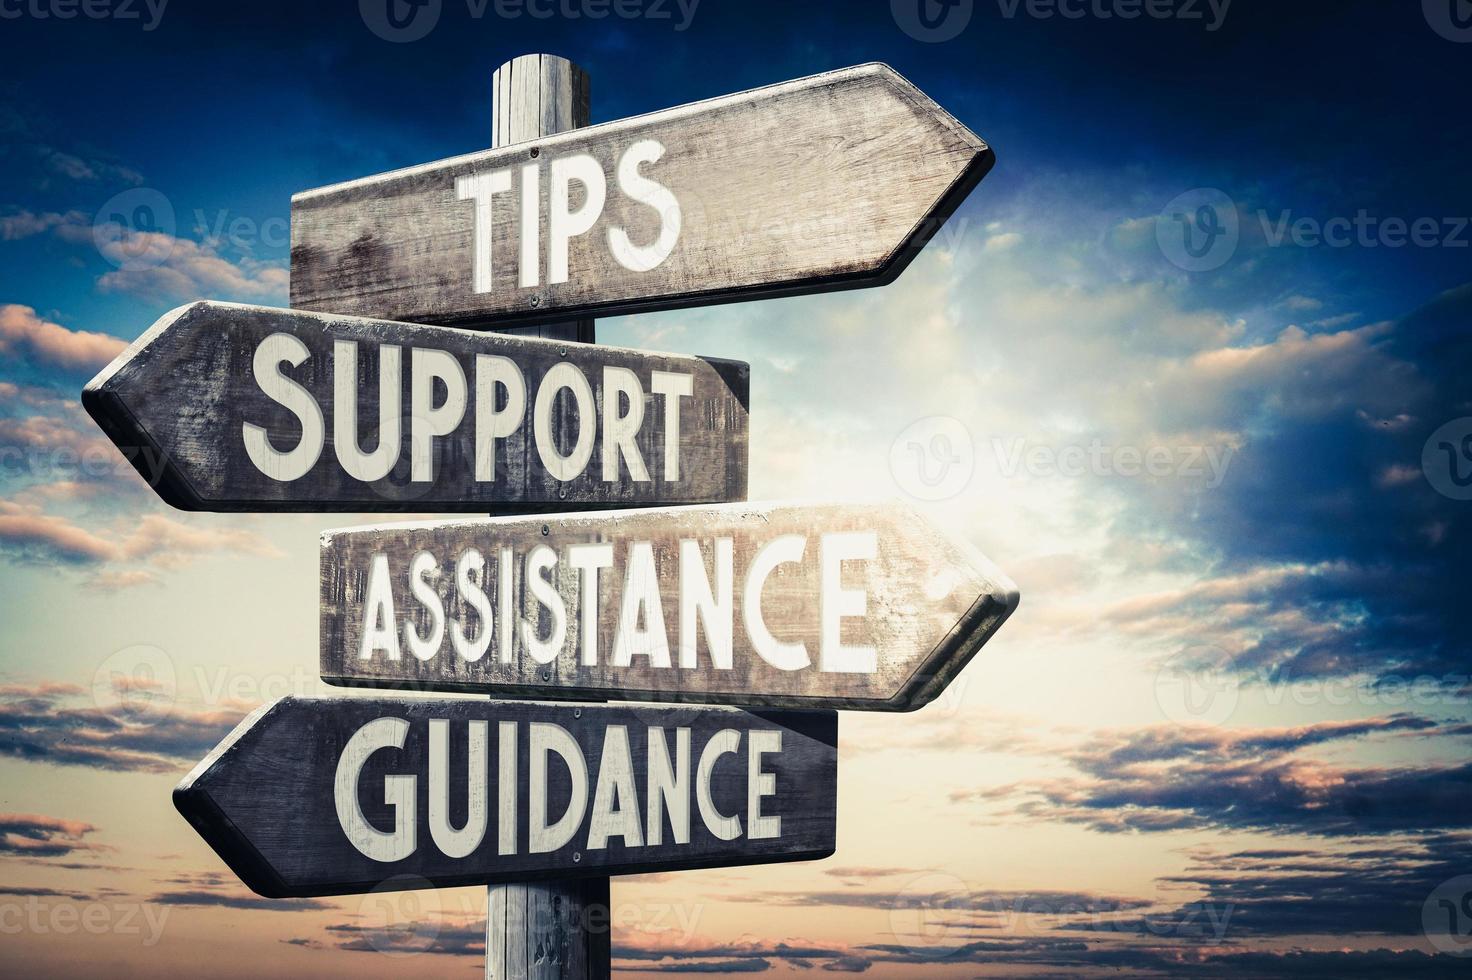 Tips, Support, Assistance, Guidance - Wooden Signpost with Four Arrows, Sunset Sky in Background photo